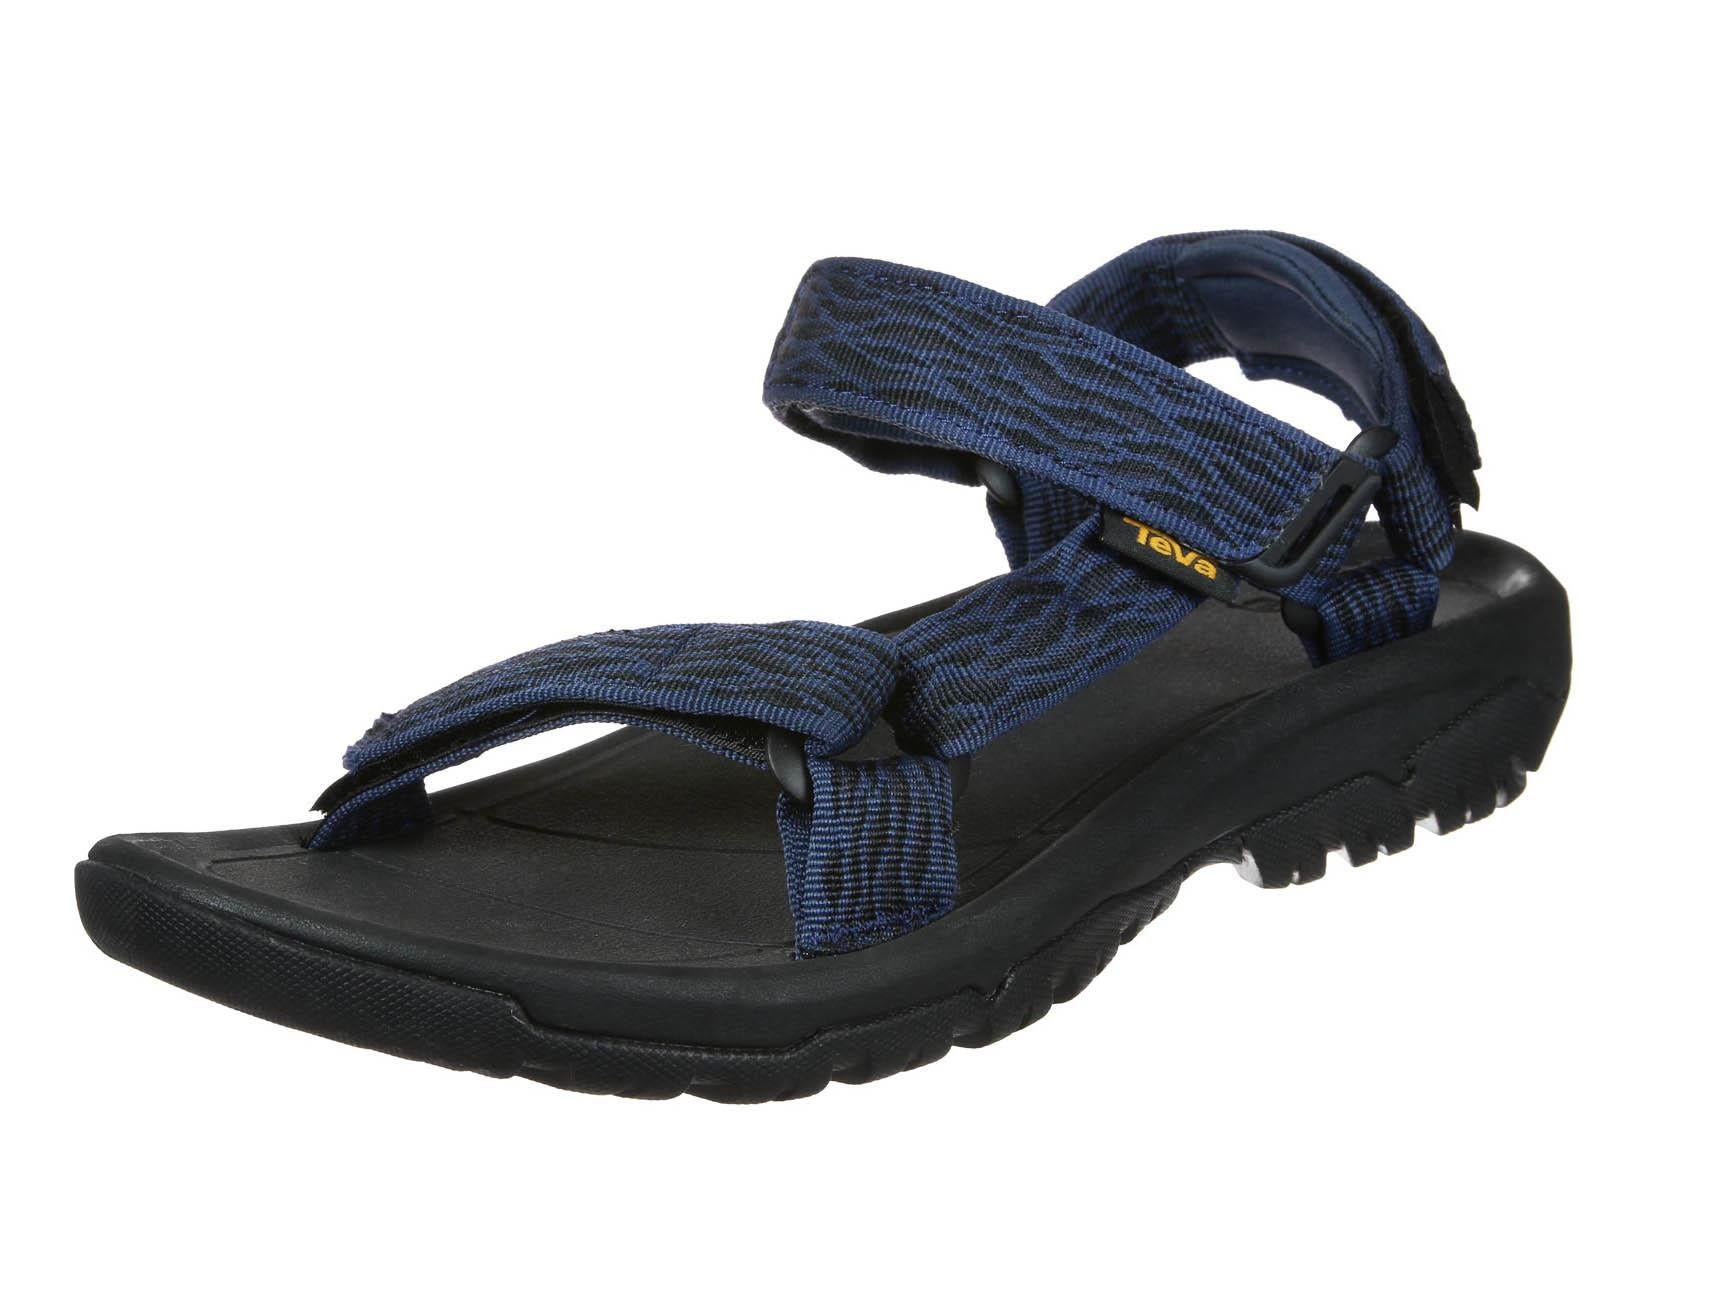 walking sandals that are breathable 